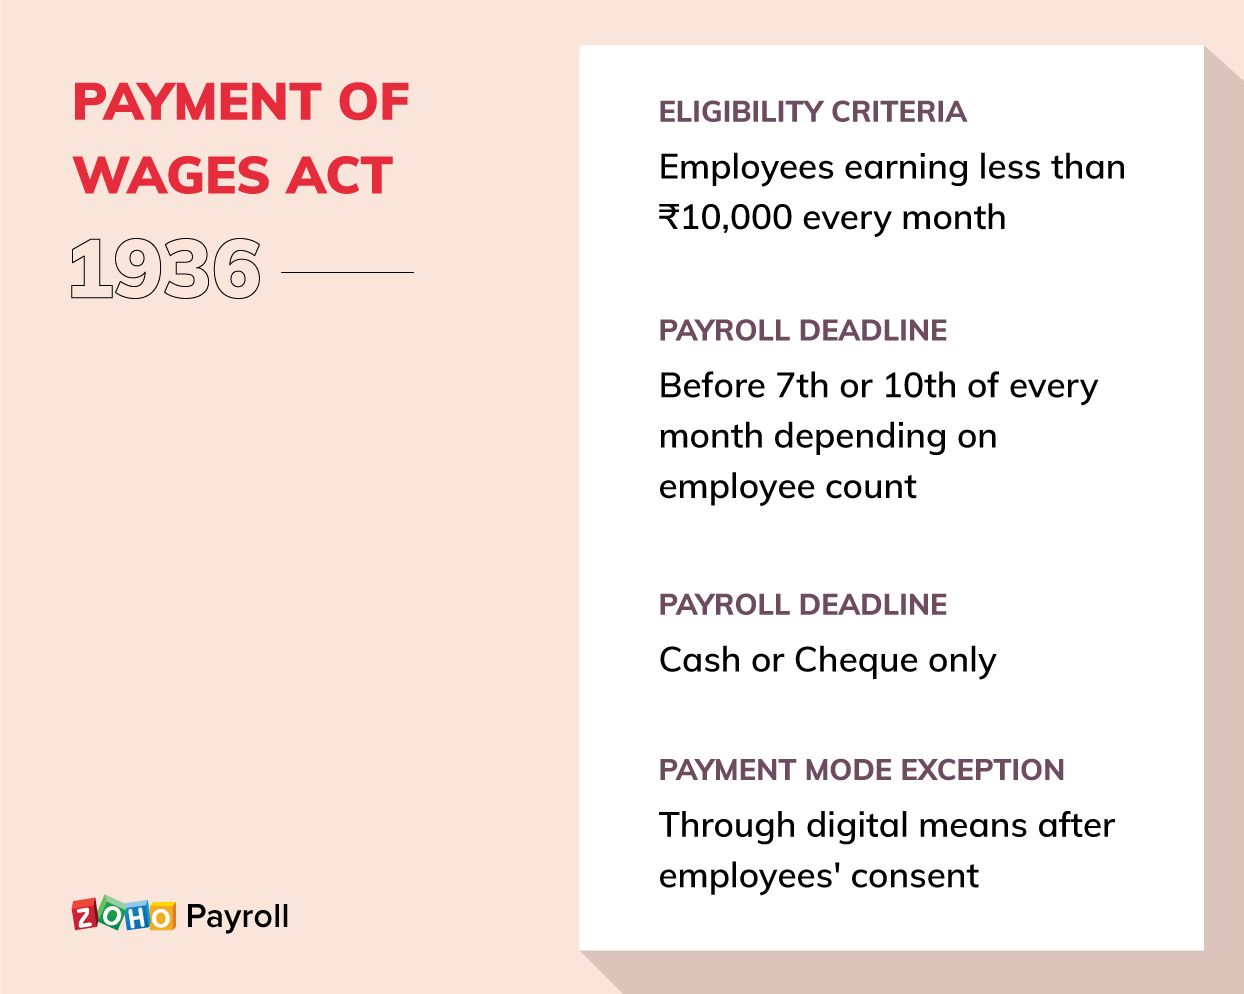 Payment of wages act, 1936